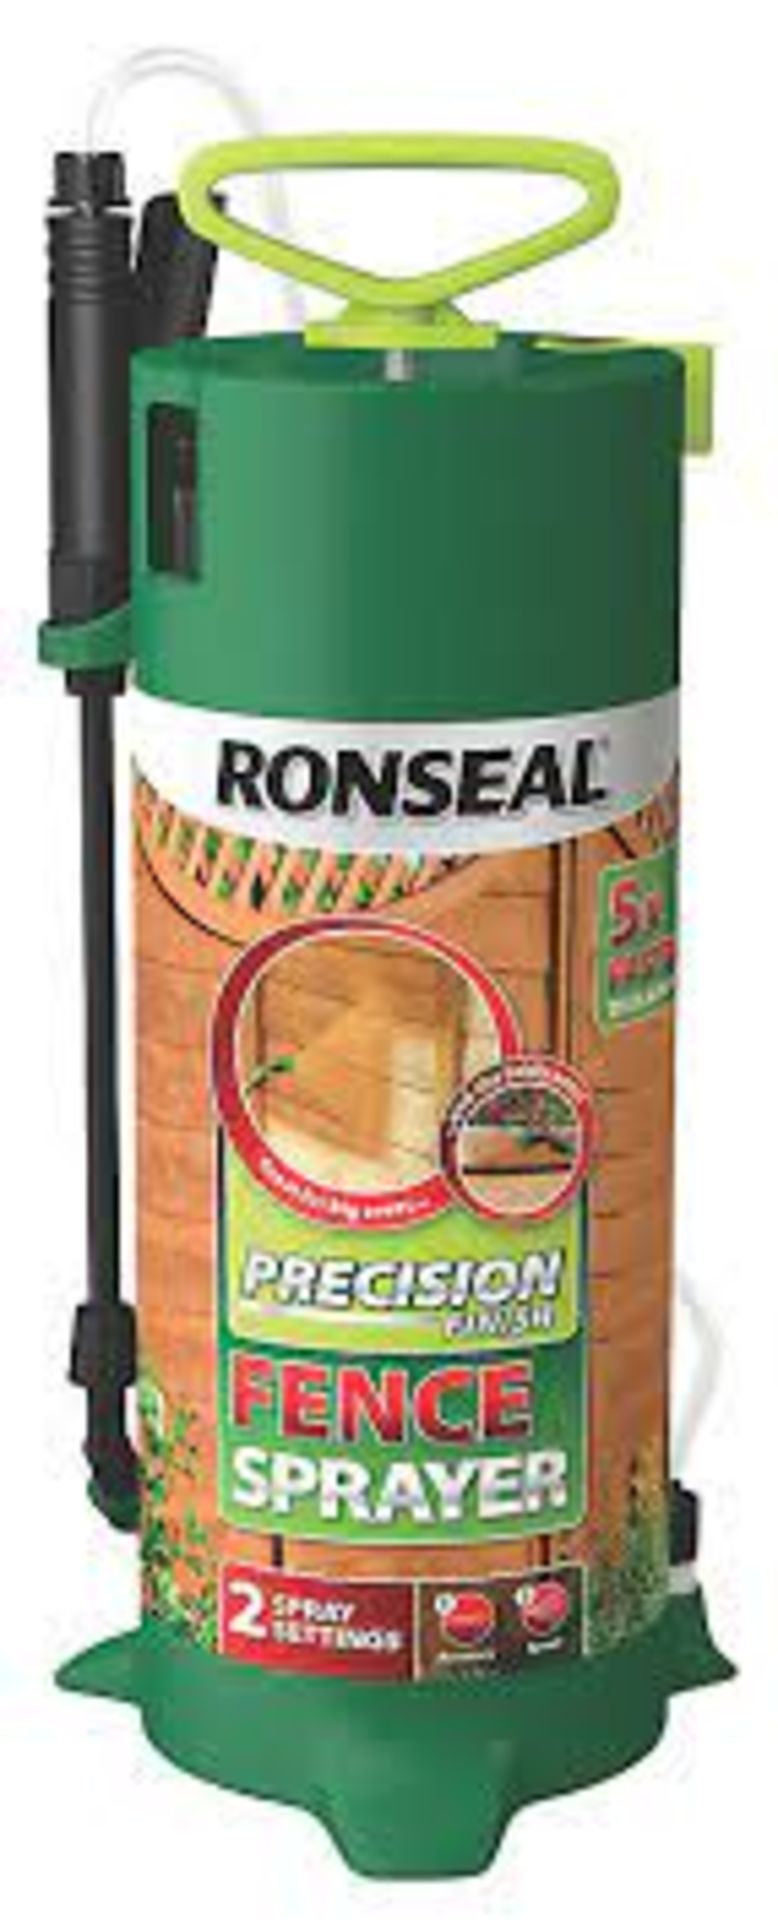 Ronseal Precision Finish Fence & shed Paint sprayer. - SR6. Ronseal Precision Finish Fence Sprayer